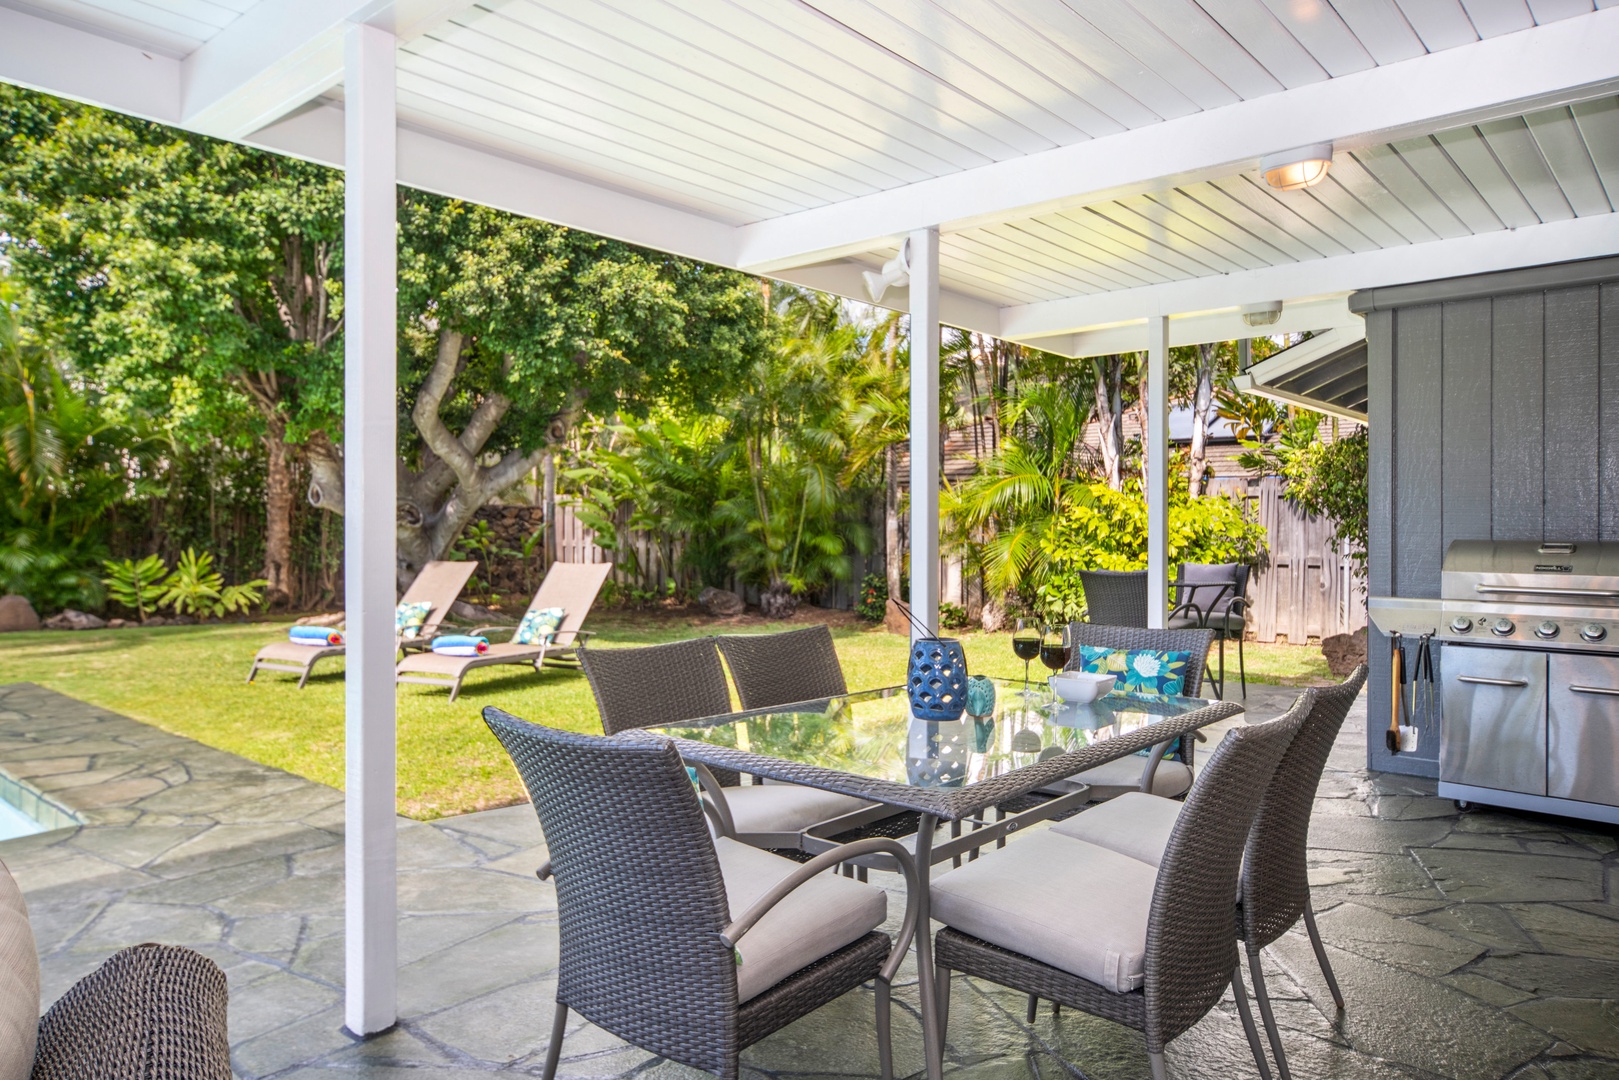 Honolulu Vacation Rentals, Hale Niuiki - Dine under the sky: spacious seating for eight in an open-air setting.